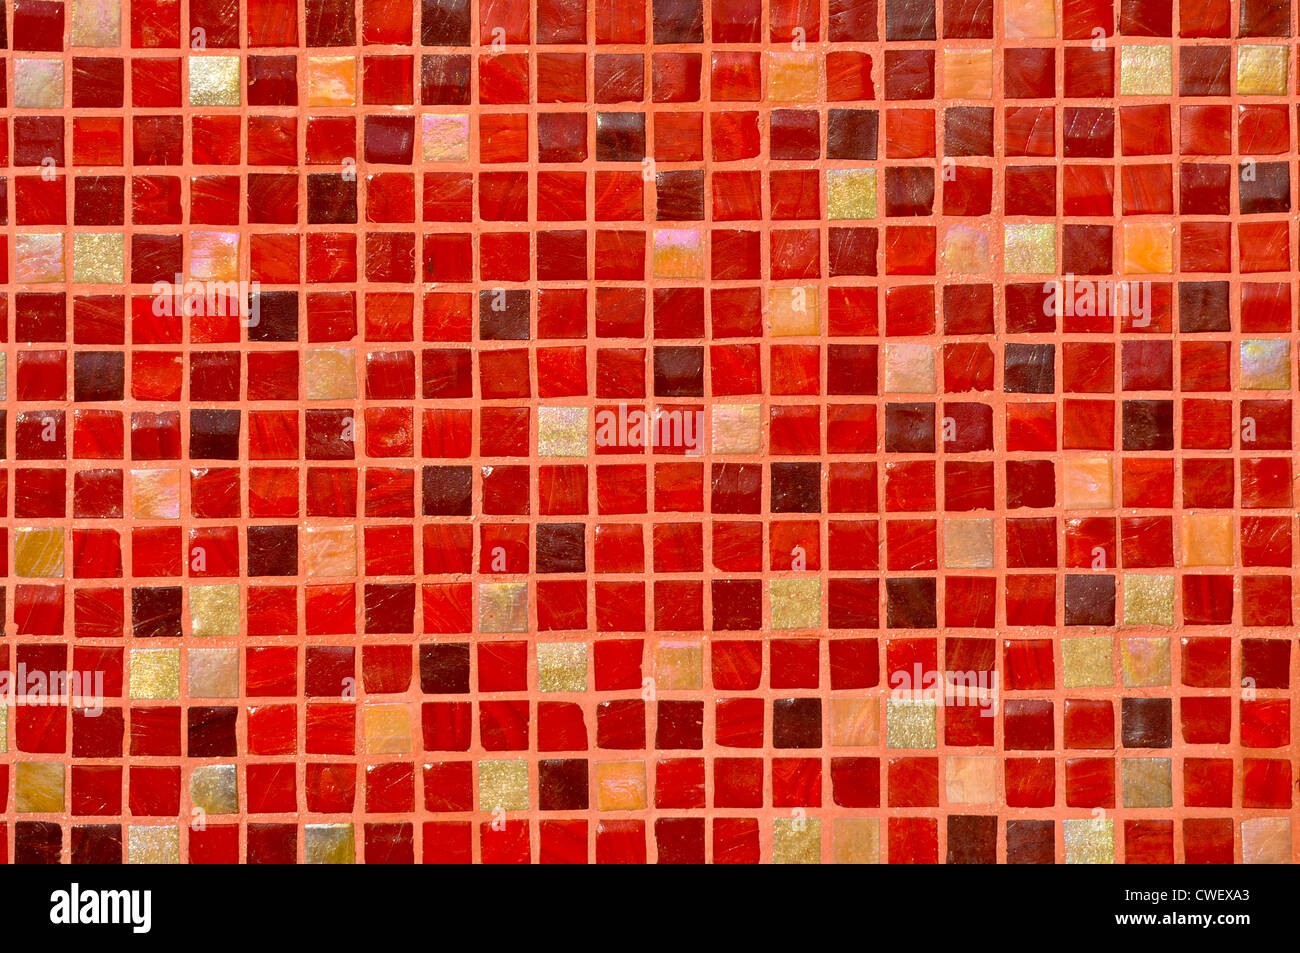 Red Mosaic Tile Background Stock Photo